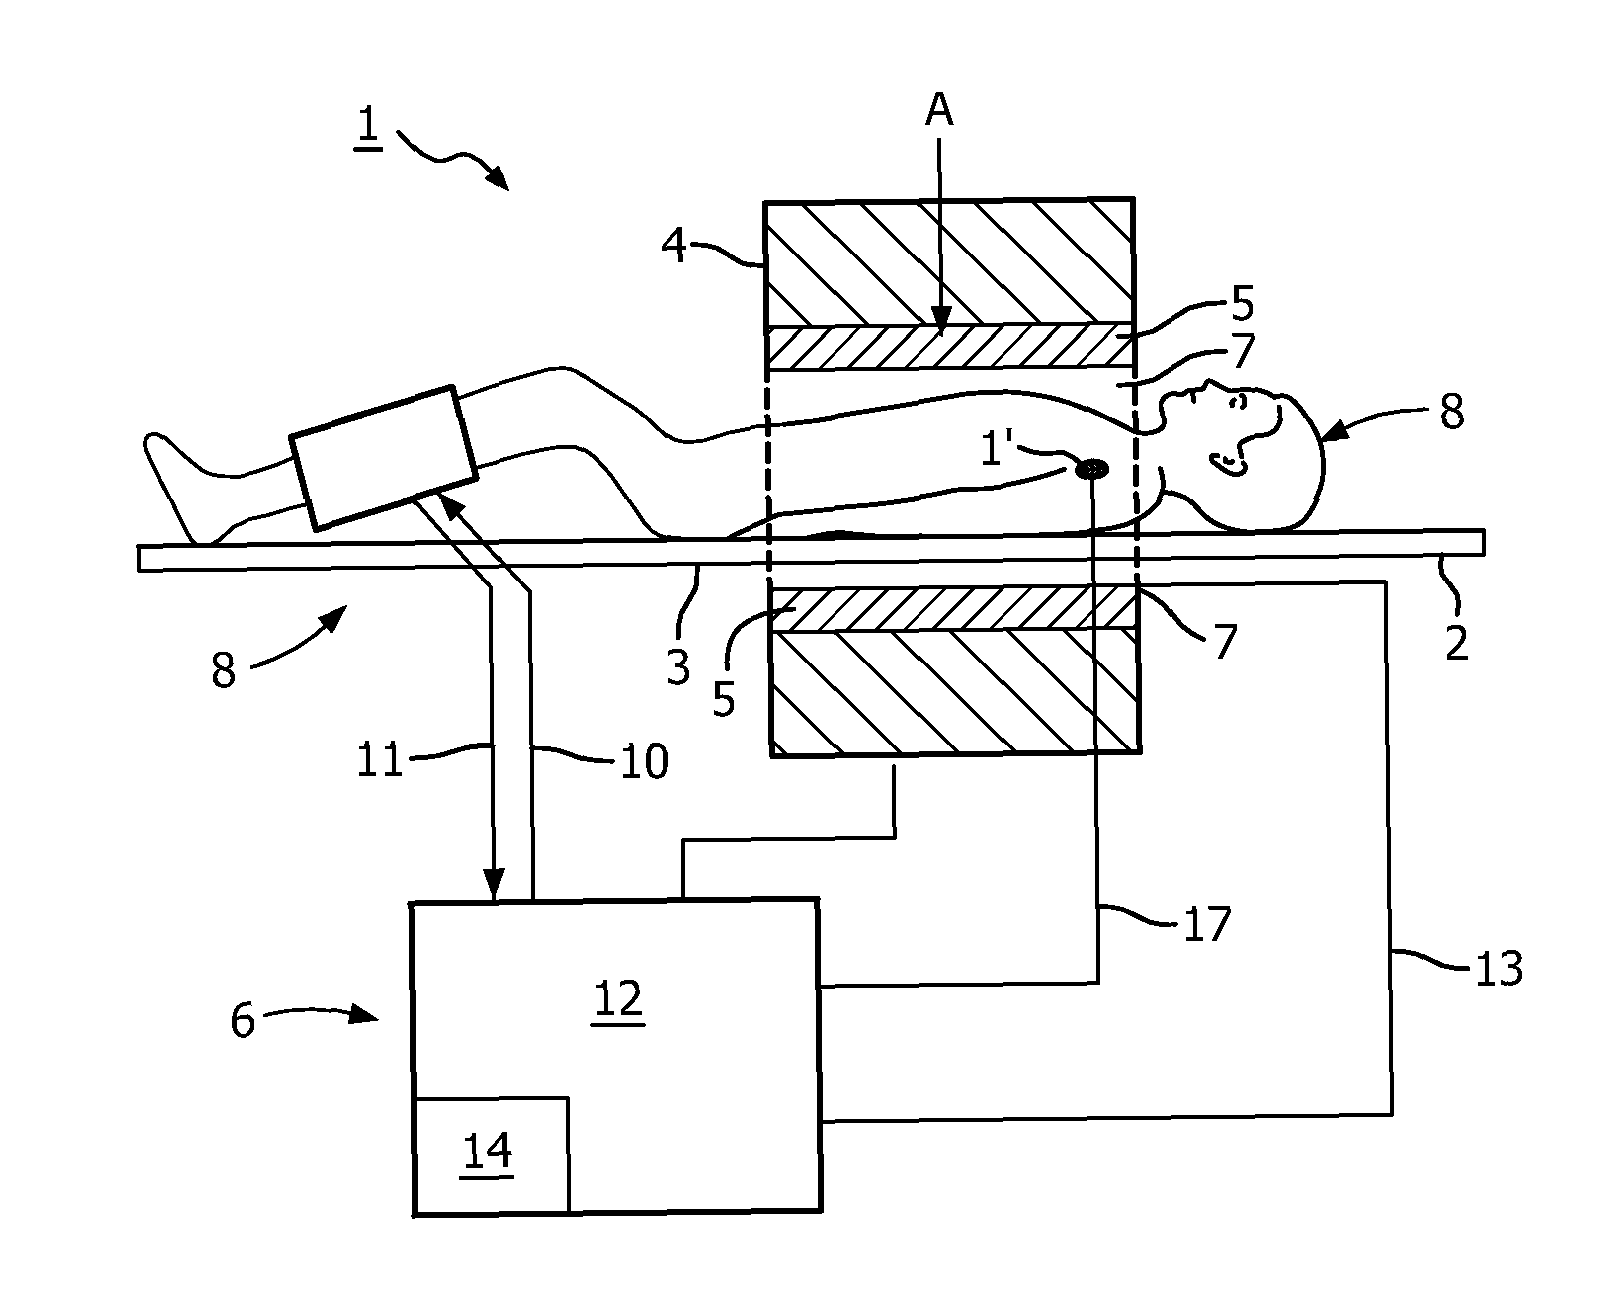 Apparatus and method for mr examination, and temperature control system and method